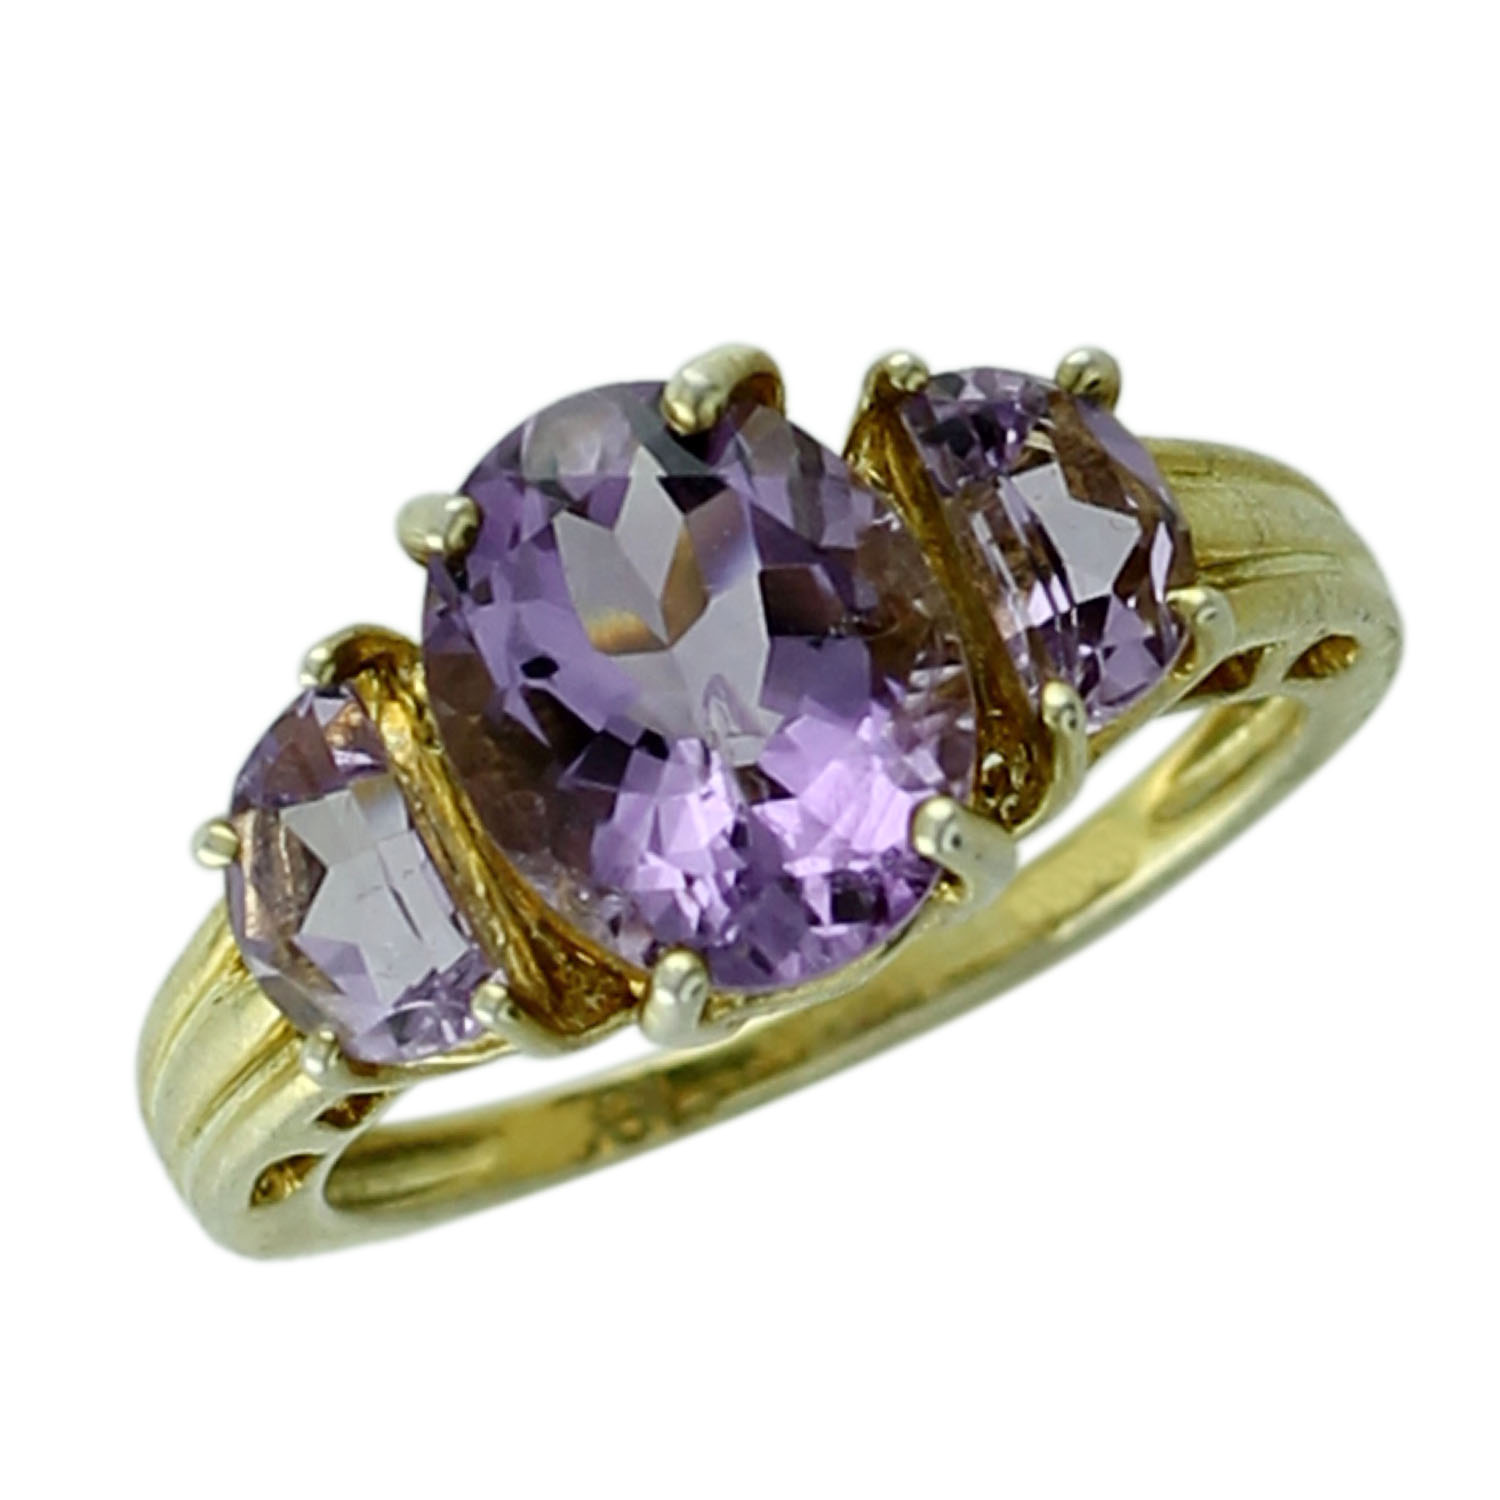 Details about   Natural Purple Amethyst Faceted Pear Gemstone 925 Sterling Silver Women Ring